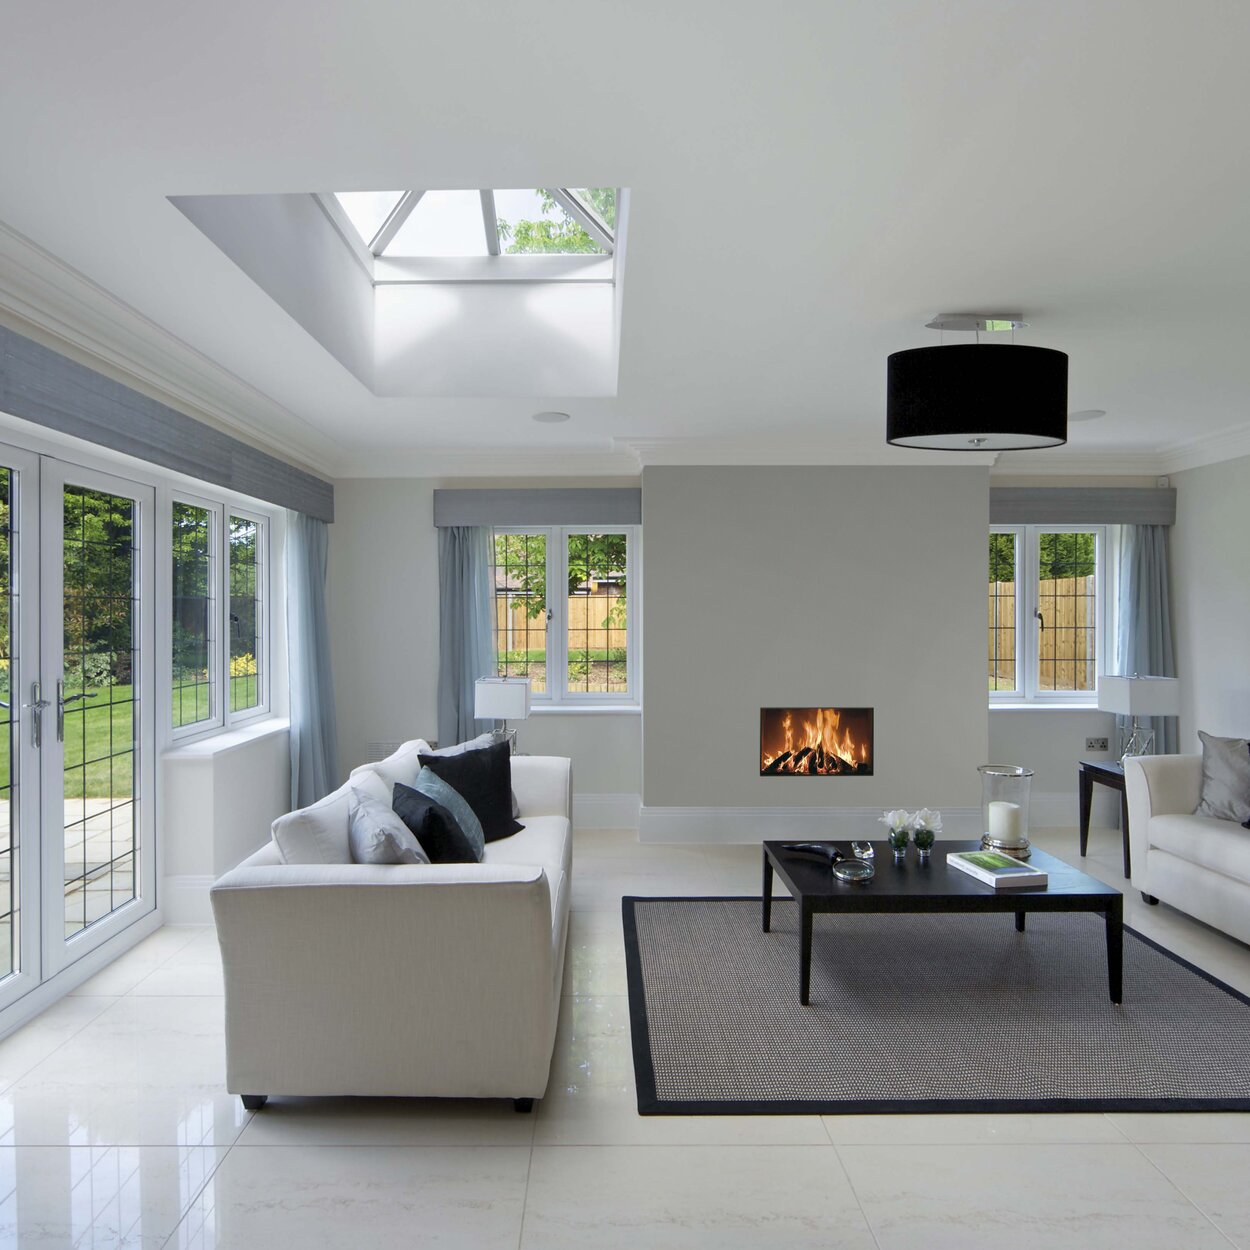 Wood fireplace W85/40F by Kalfire in a modern, bright living room with furniture in white and black